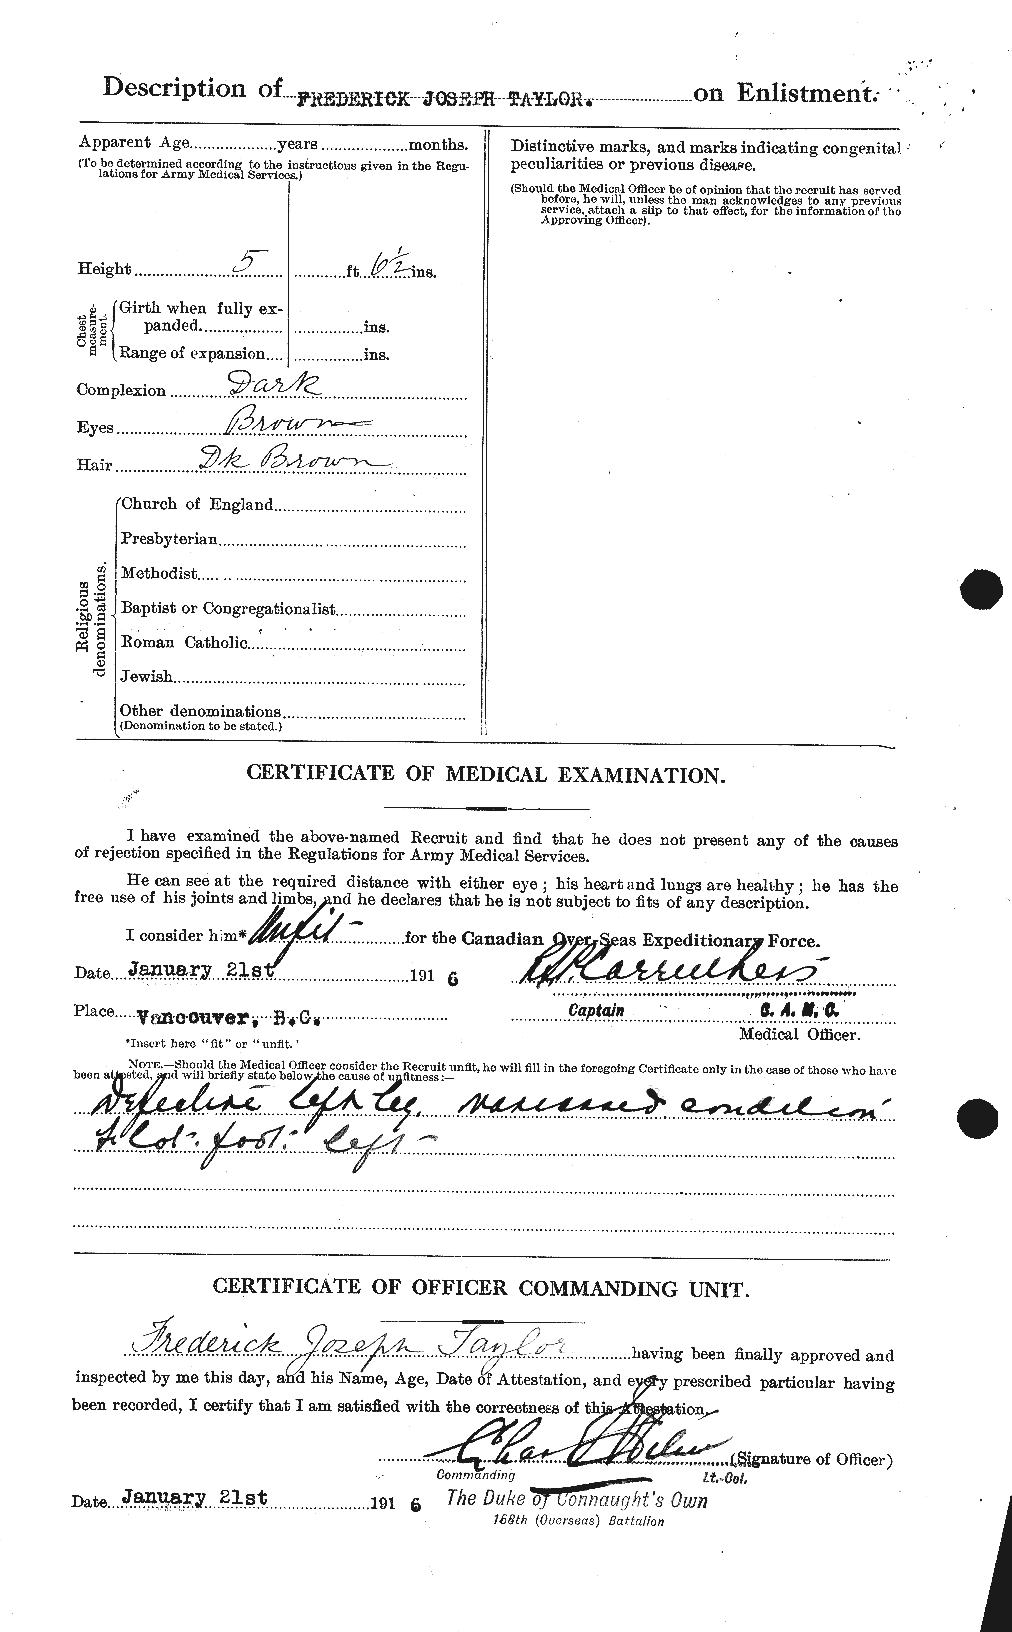 Personnel Records of the First World War - CEF 625810b